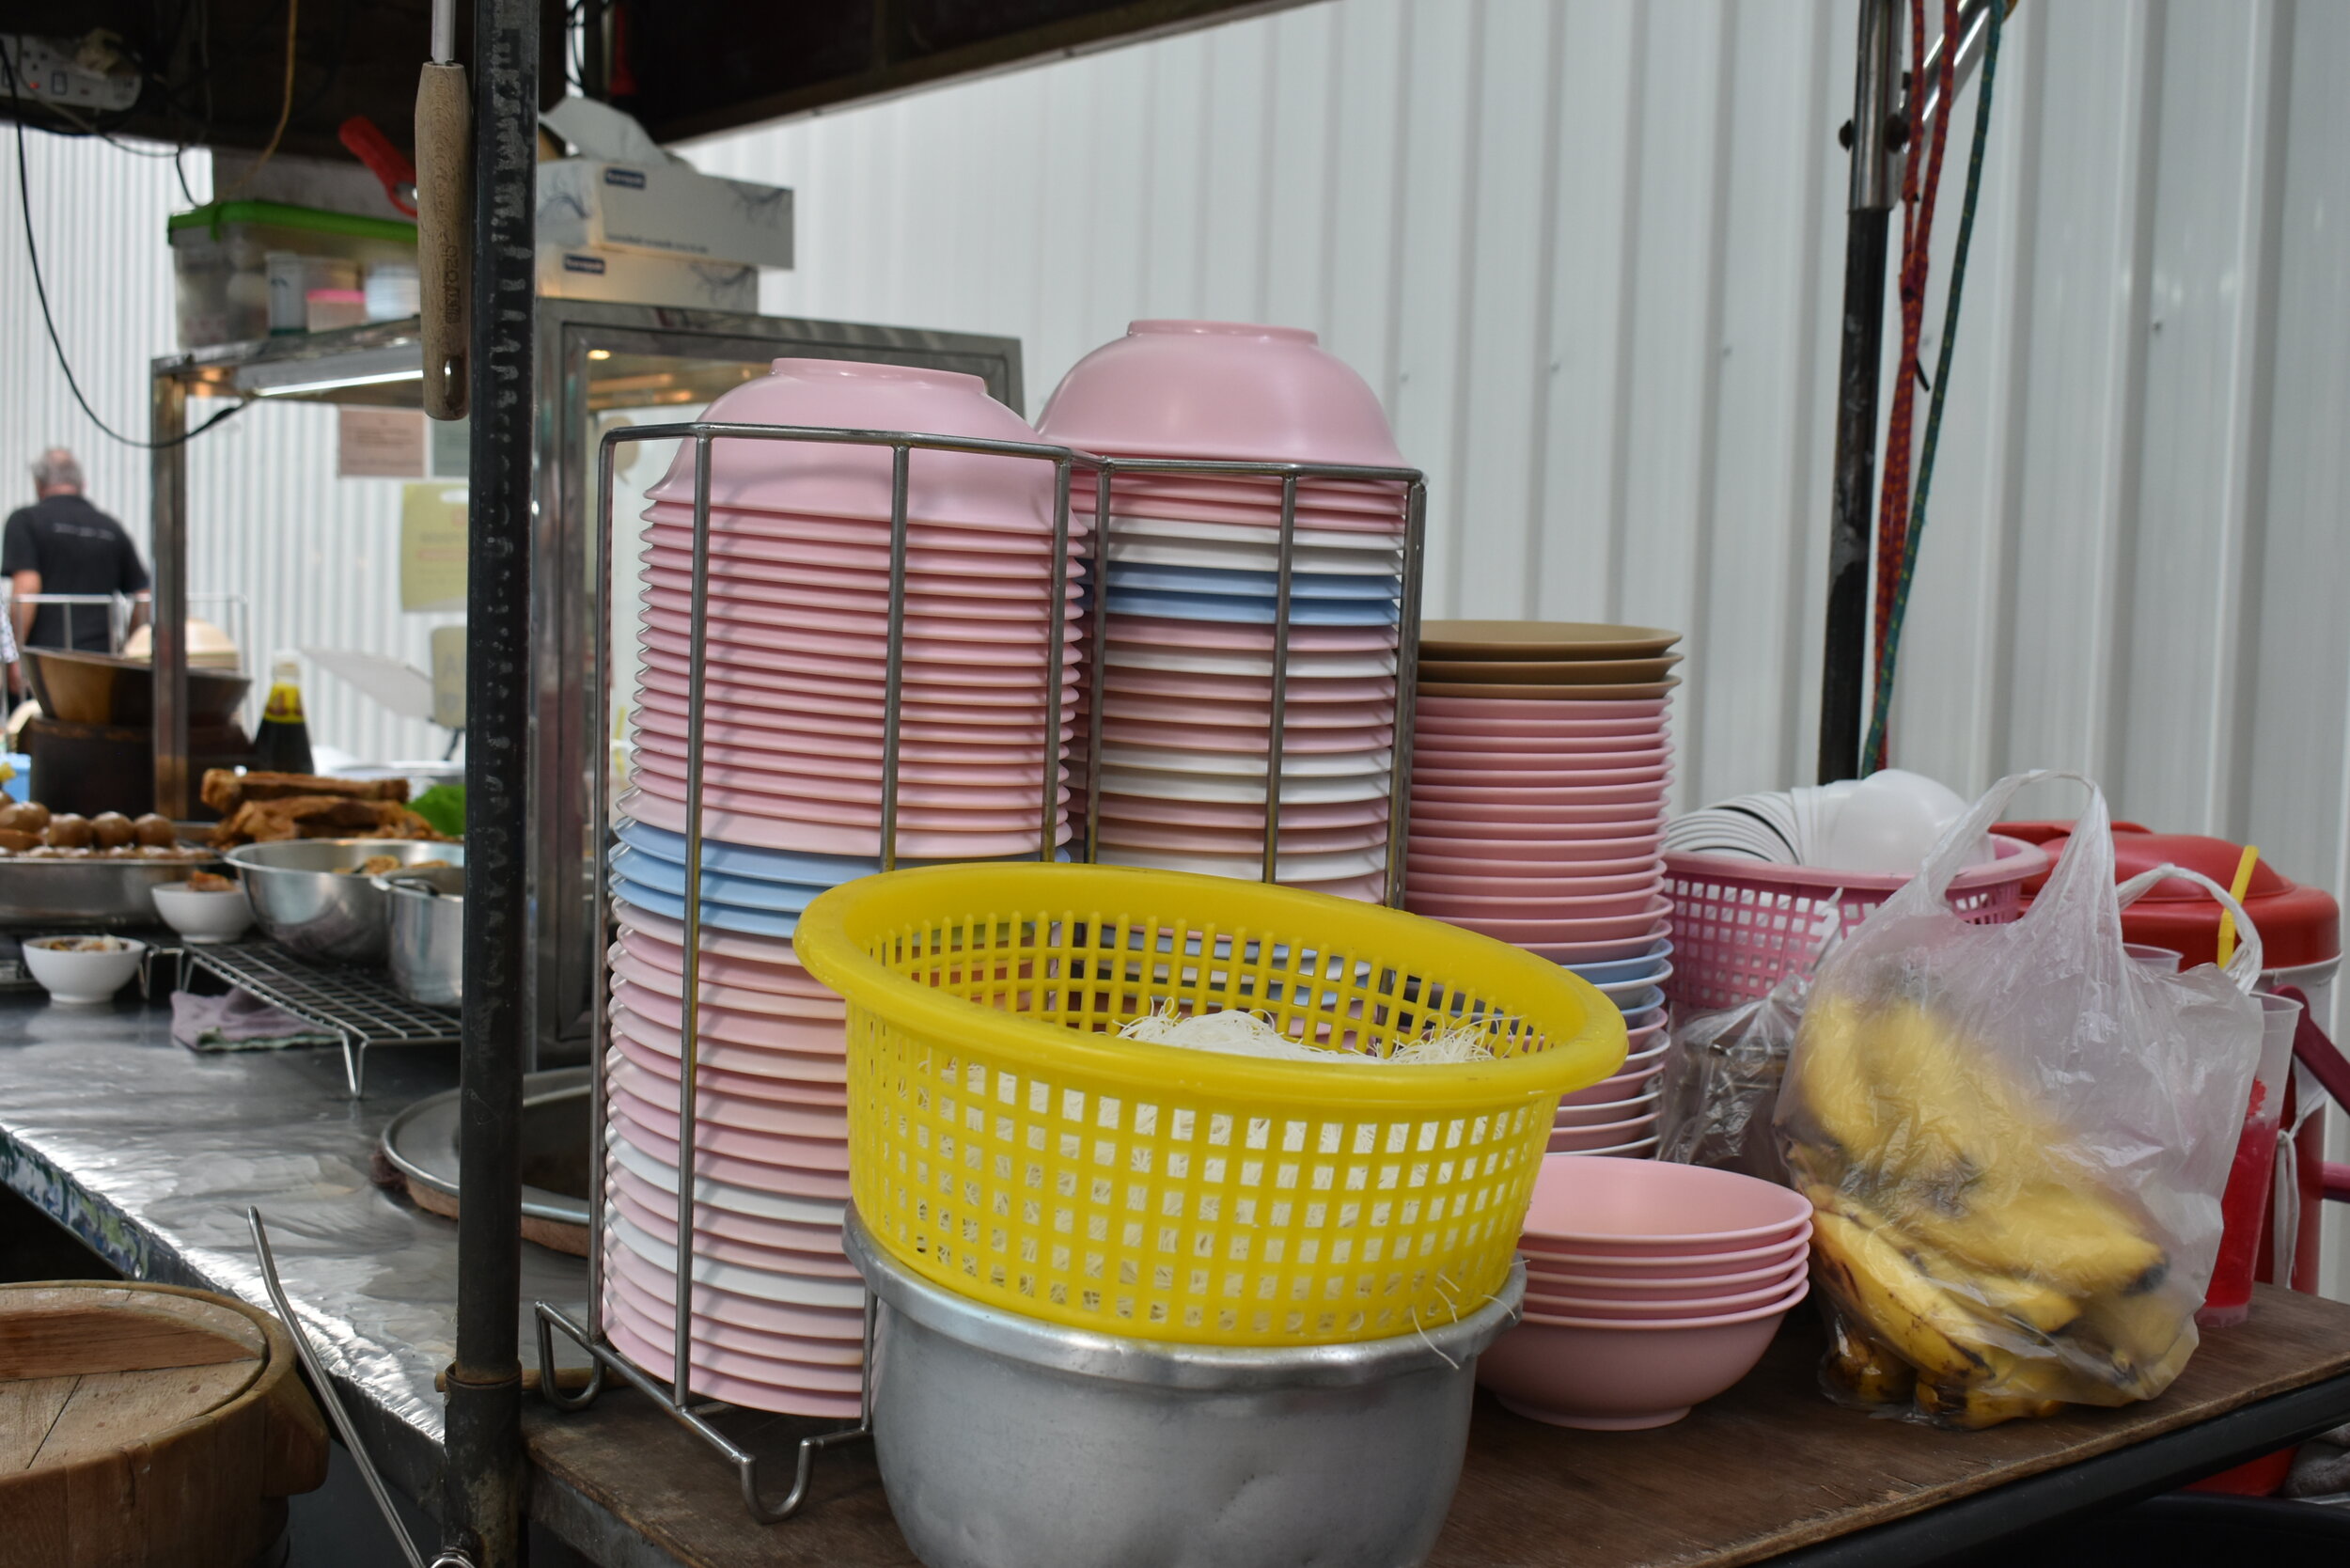 Stacks of food containers1.JPG